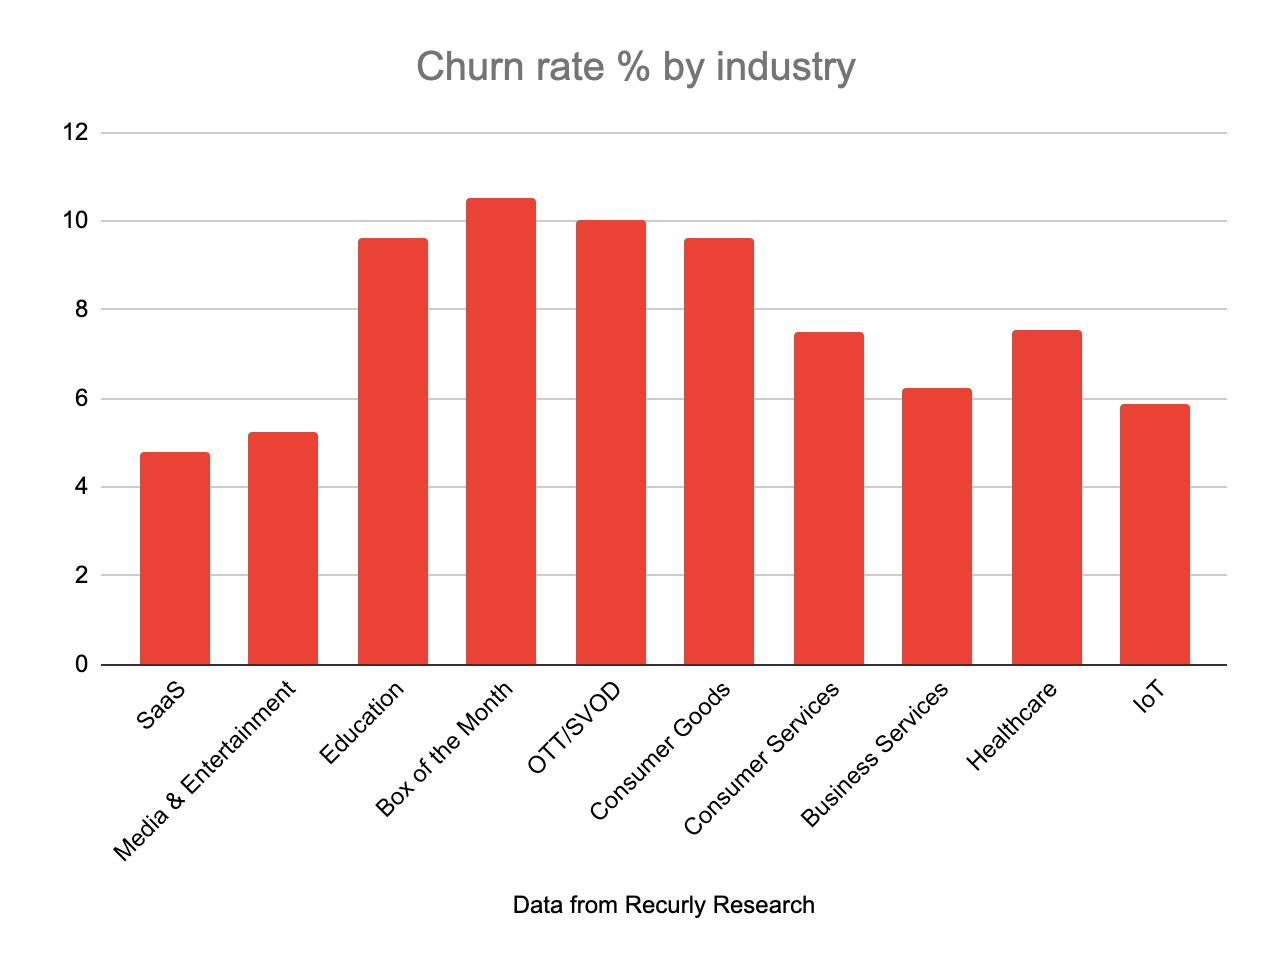 chart about churn rate by industry